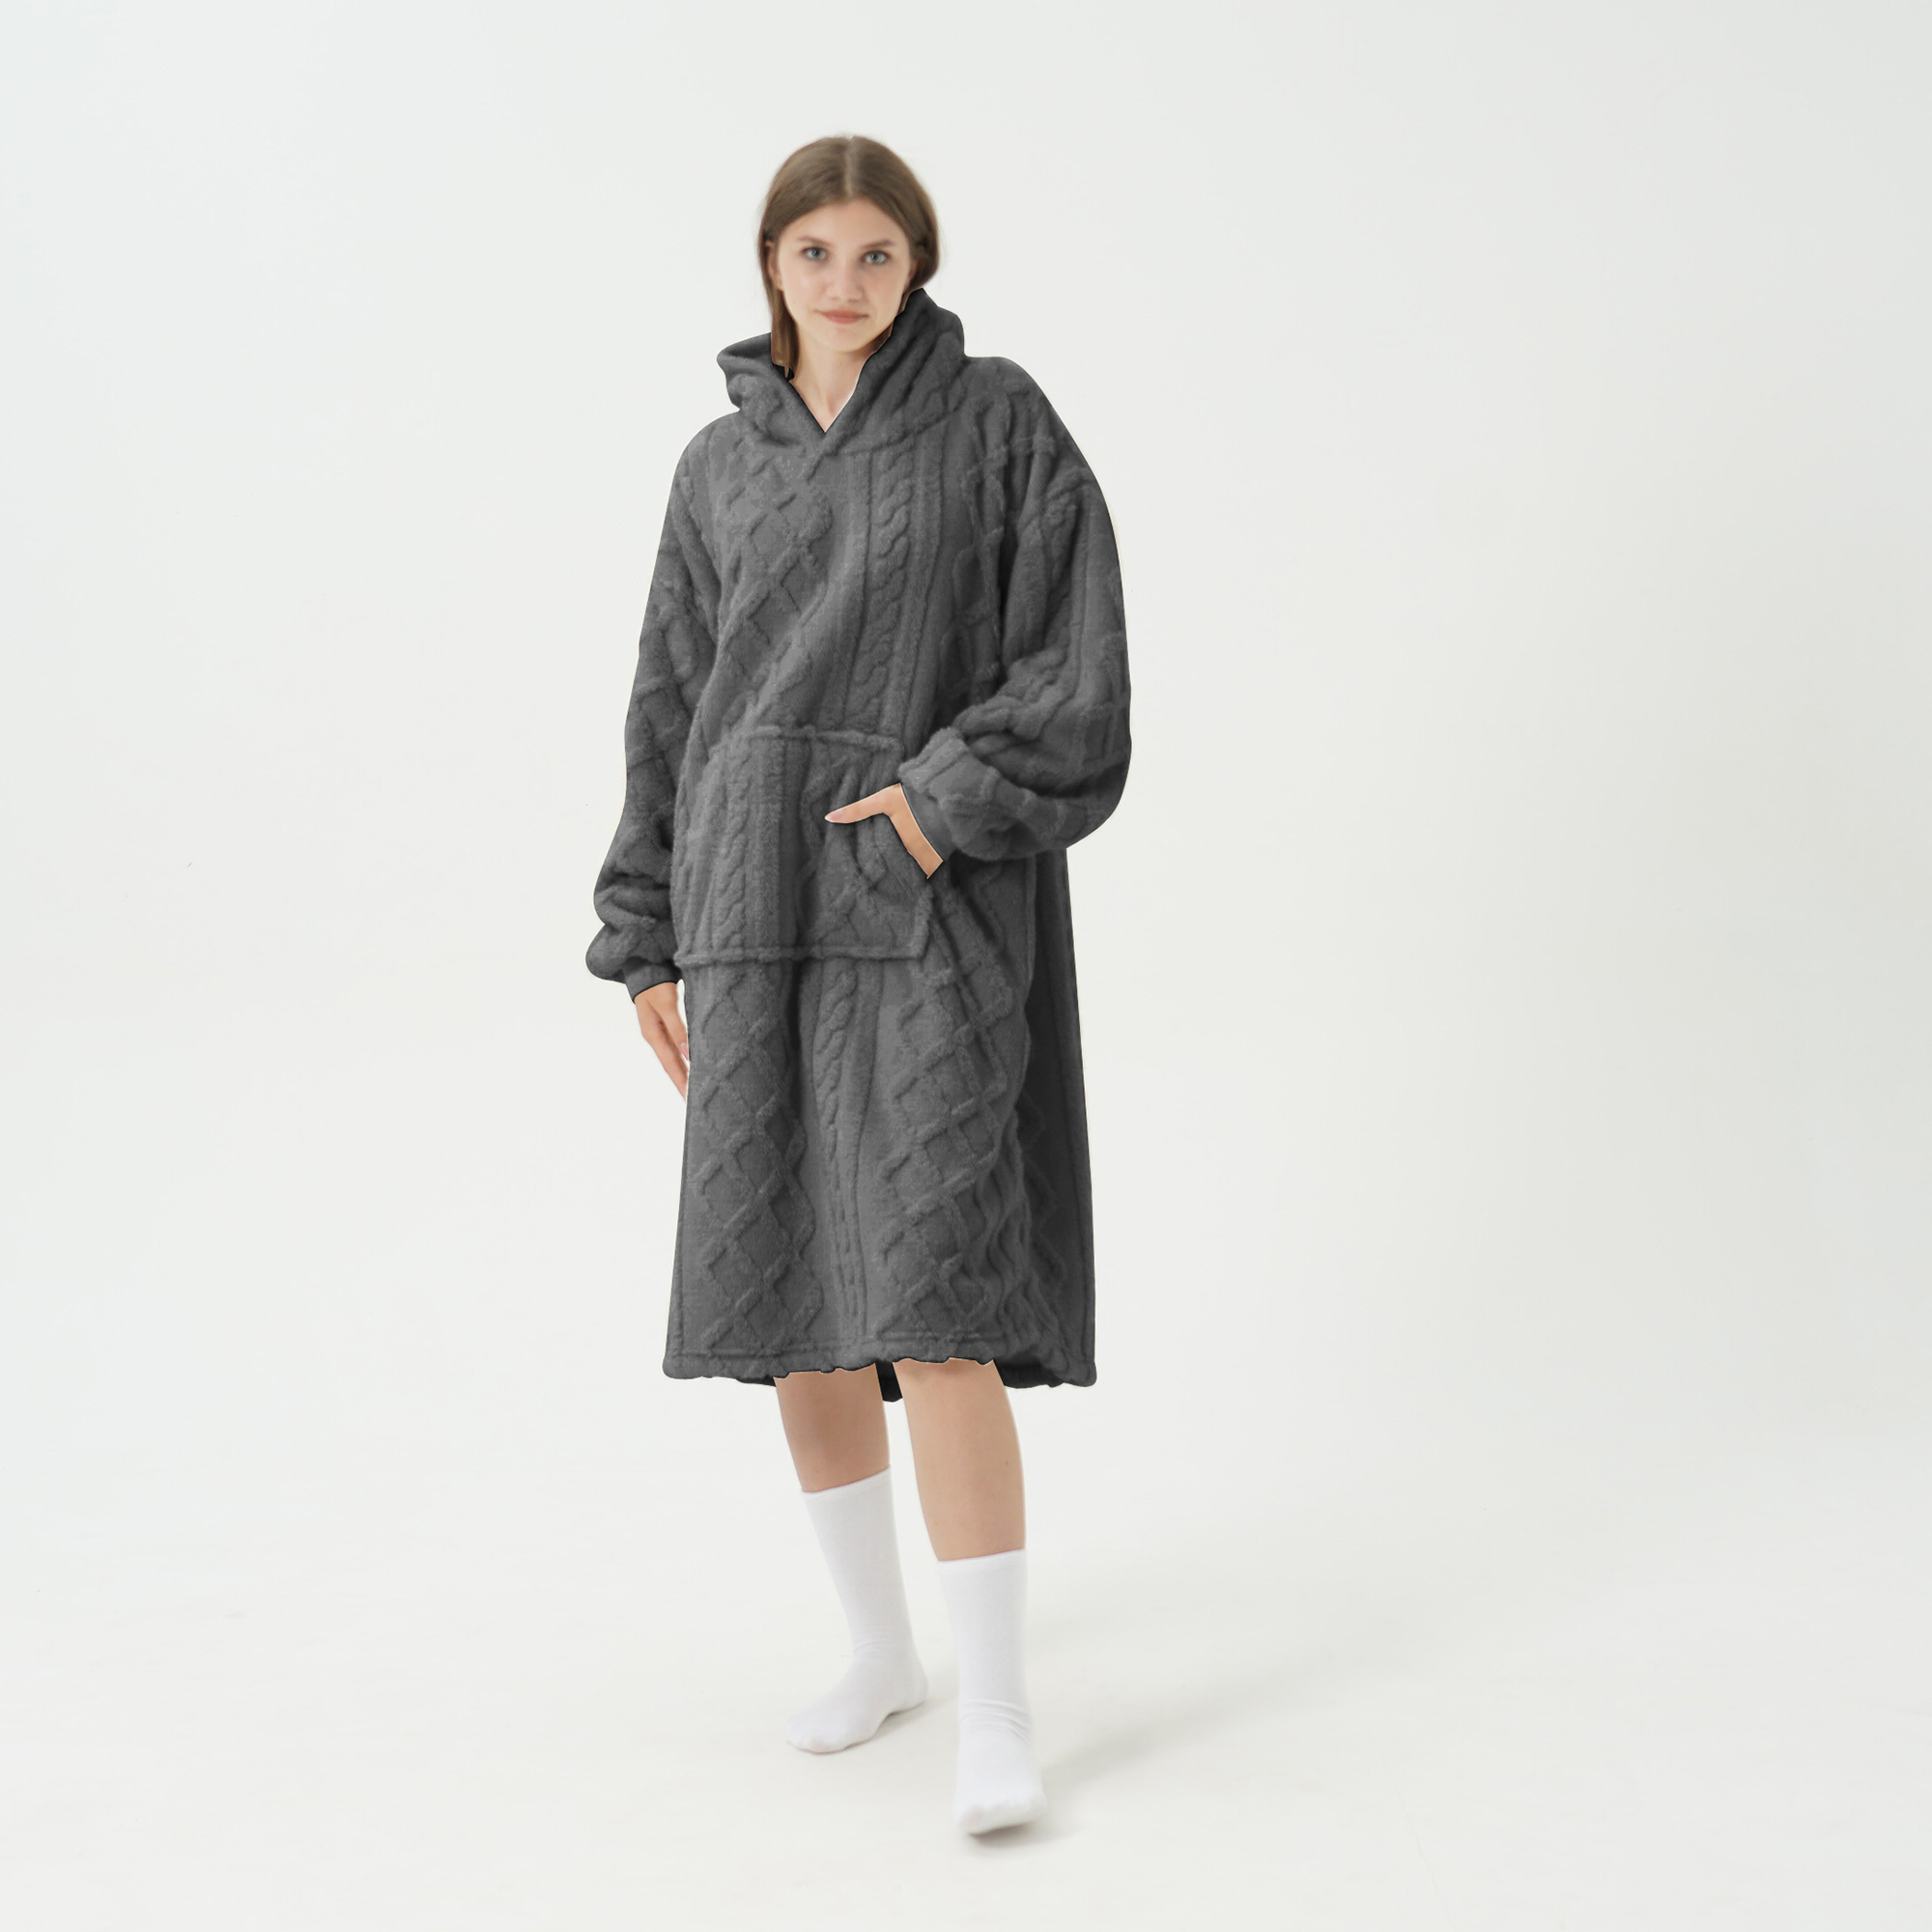 SOPHIE - Oversized Hoodie - 70x110 cm - Charcoal Gray - anthracite